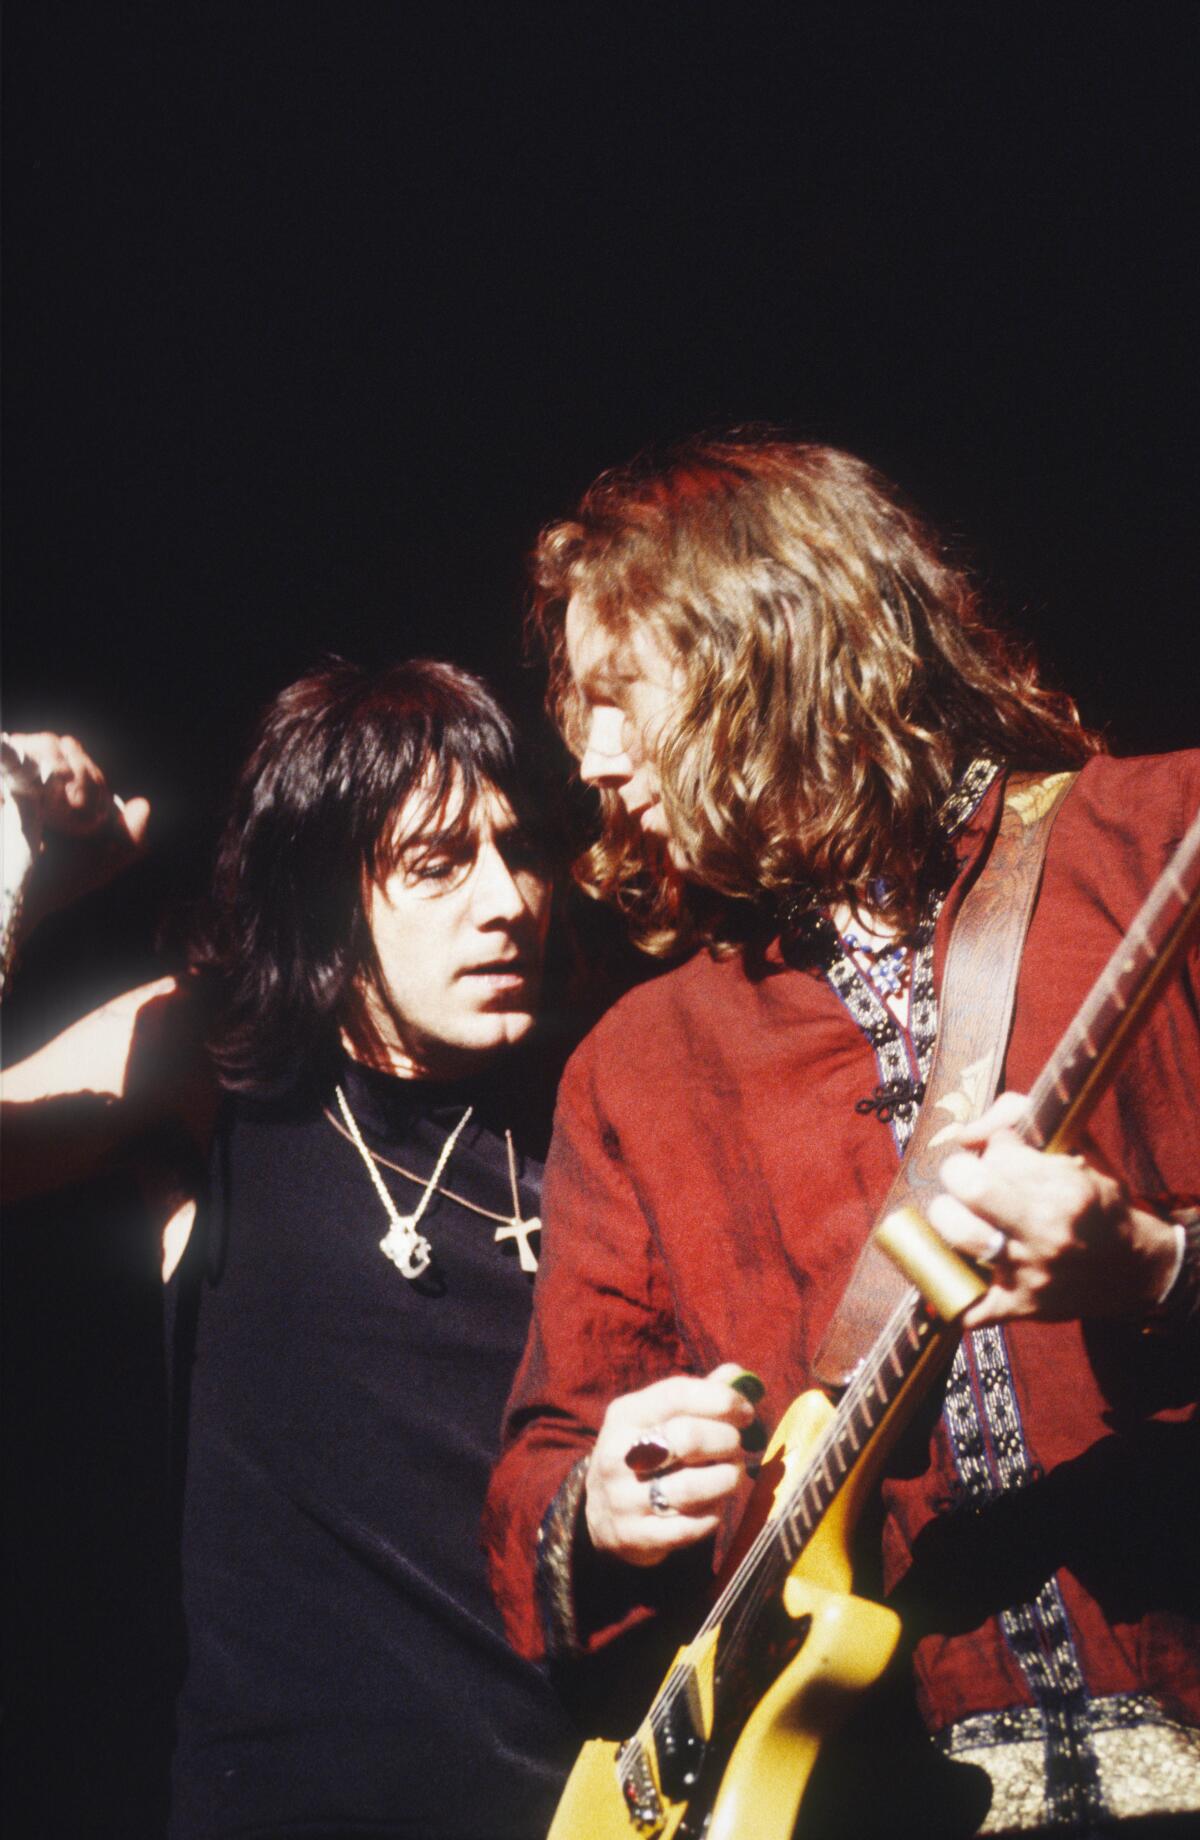 The Black Crowes' Chris and Rich Robinson performing in 1999.